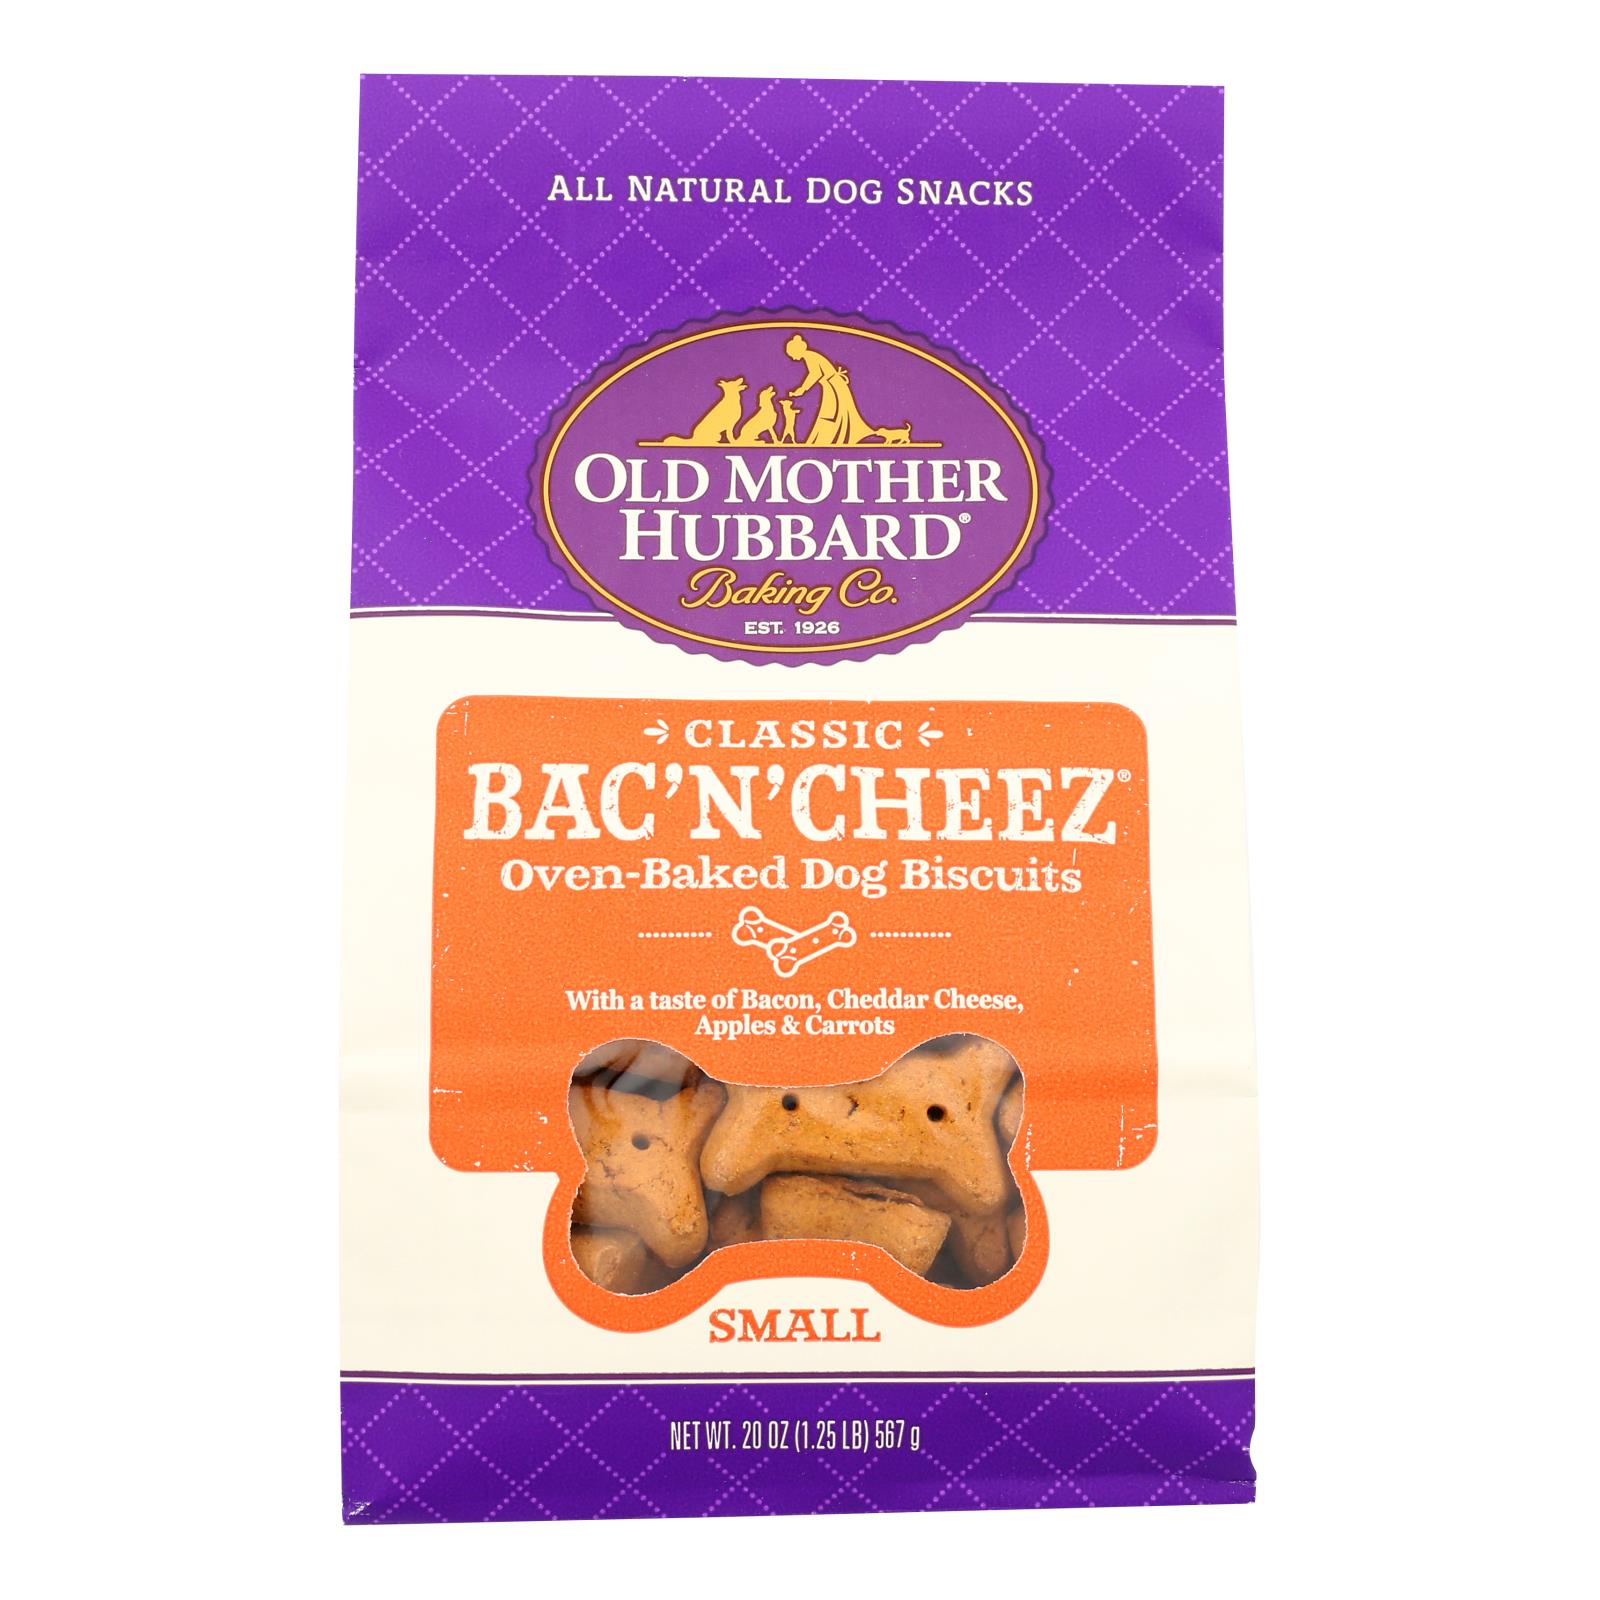 Old Mother Hubbard - Biscuits Bac'n'cheez Sm - 6개 묶음상품 - 20 OZ